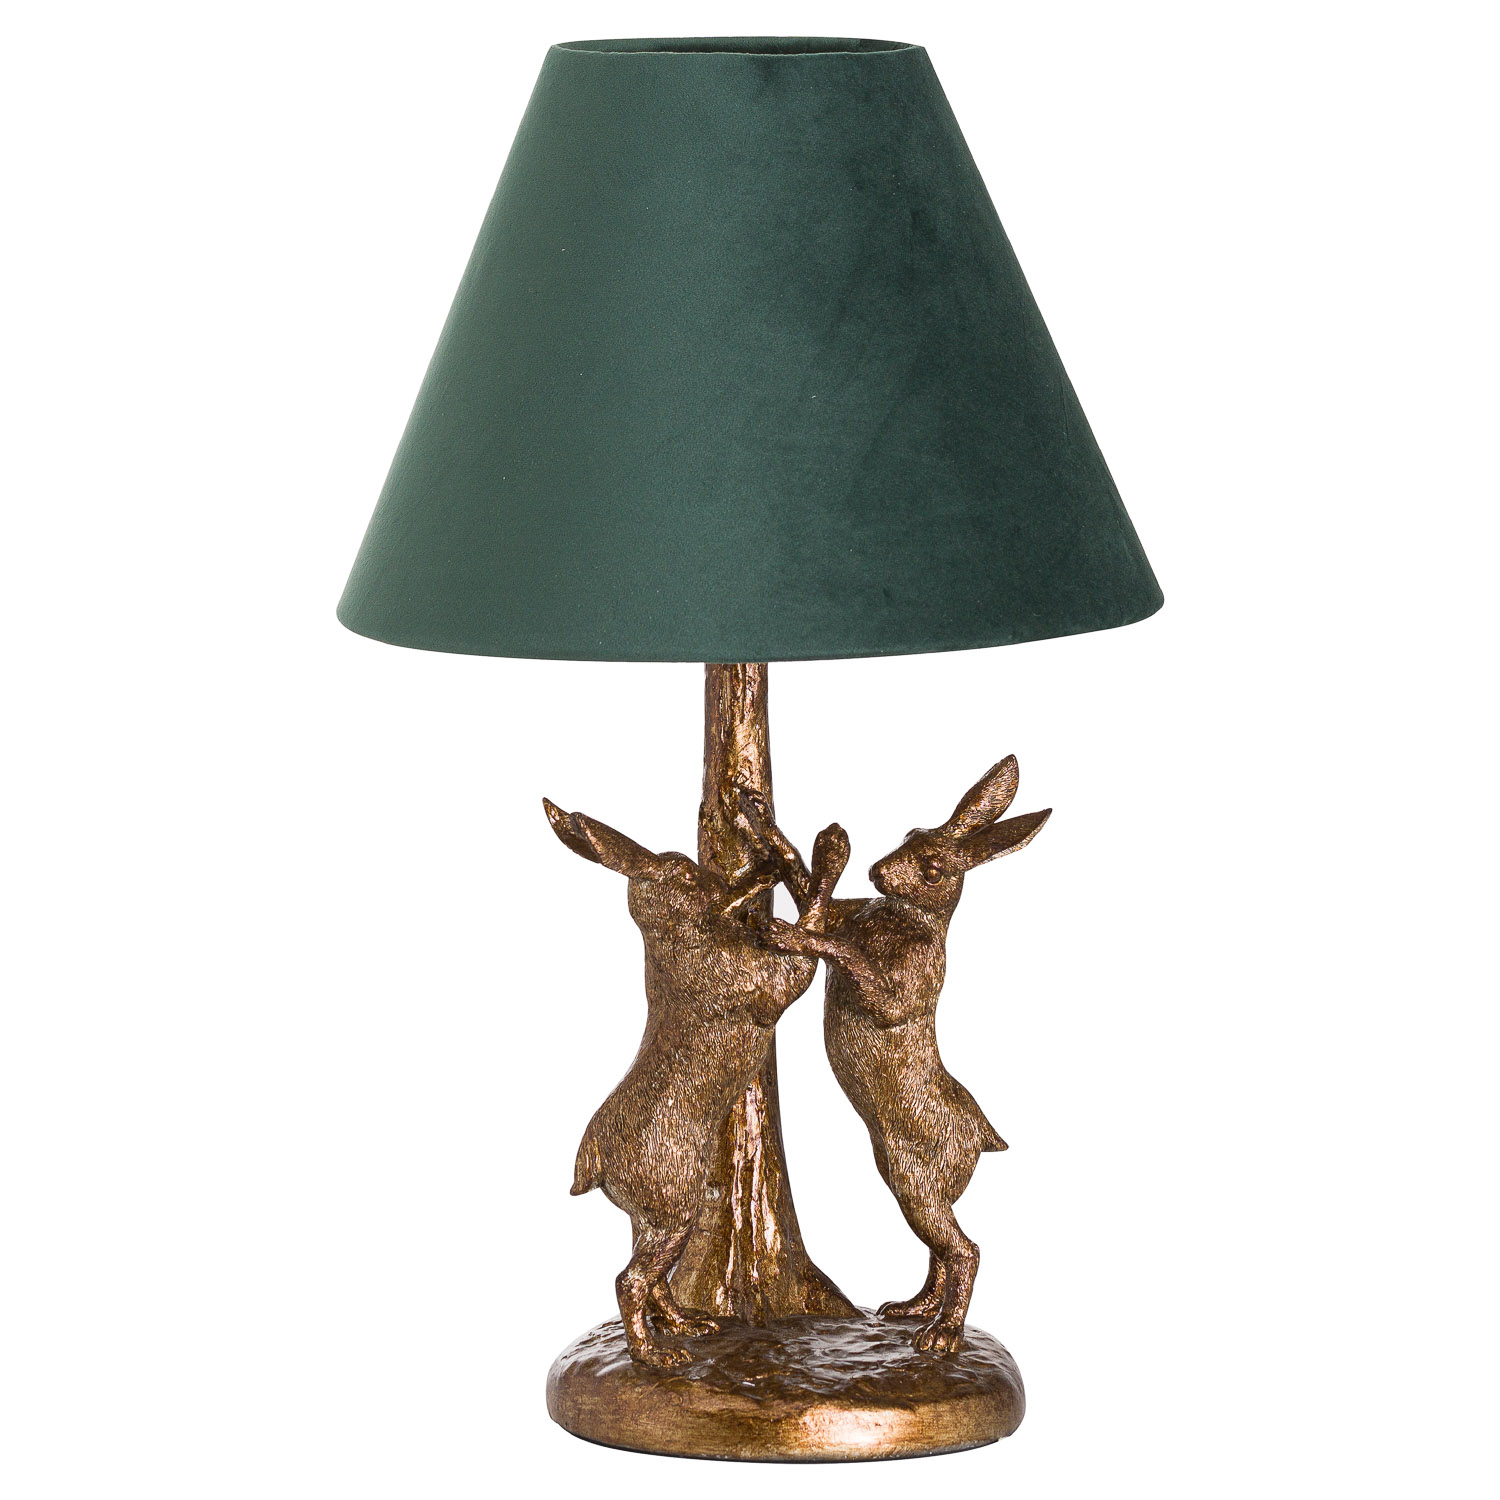 Antique Gold Marching Hares Lamp With Green Velvet Shade - Image 1